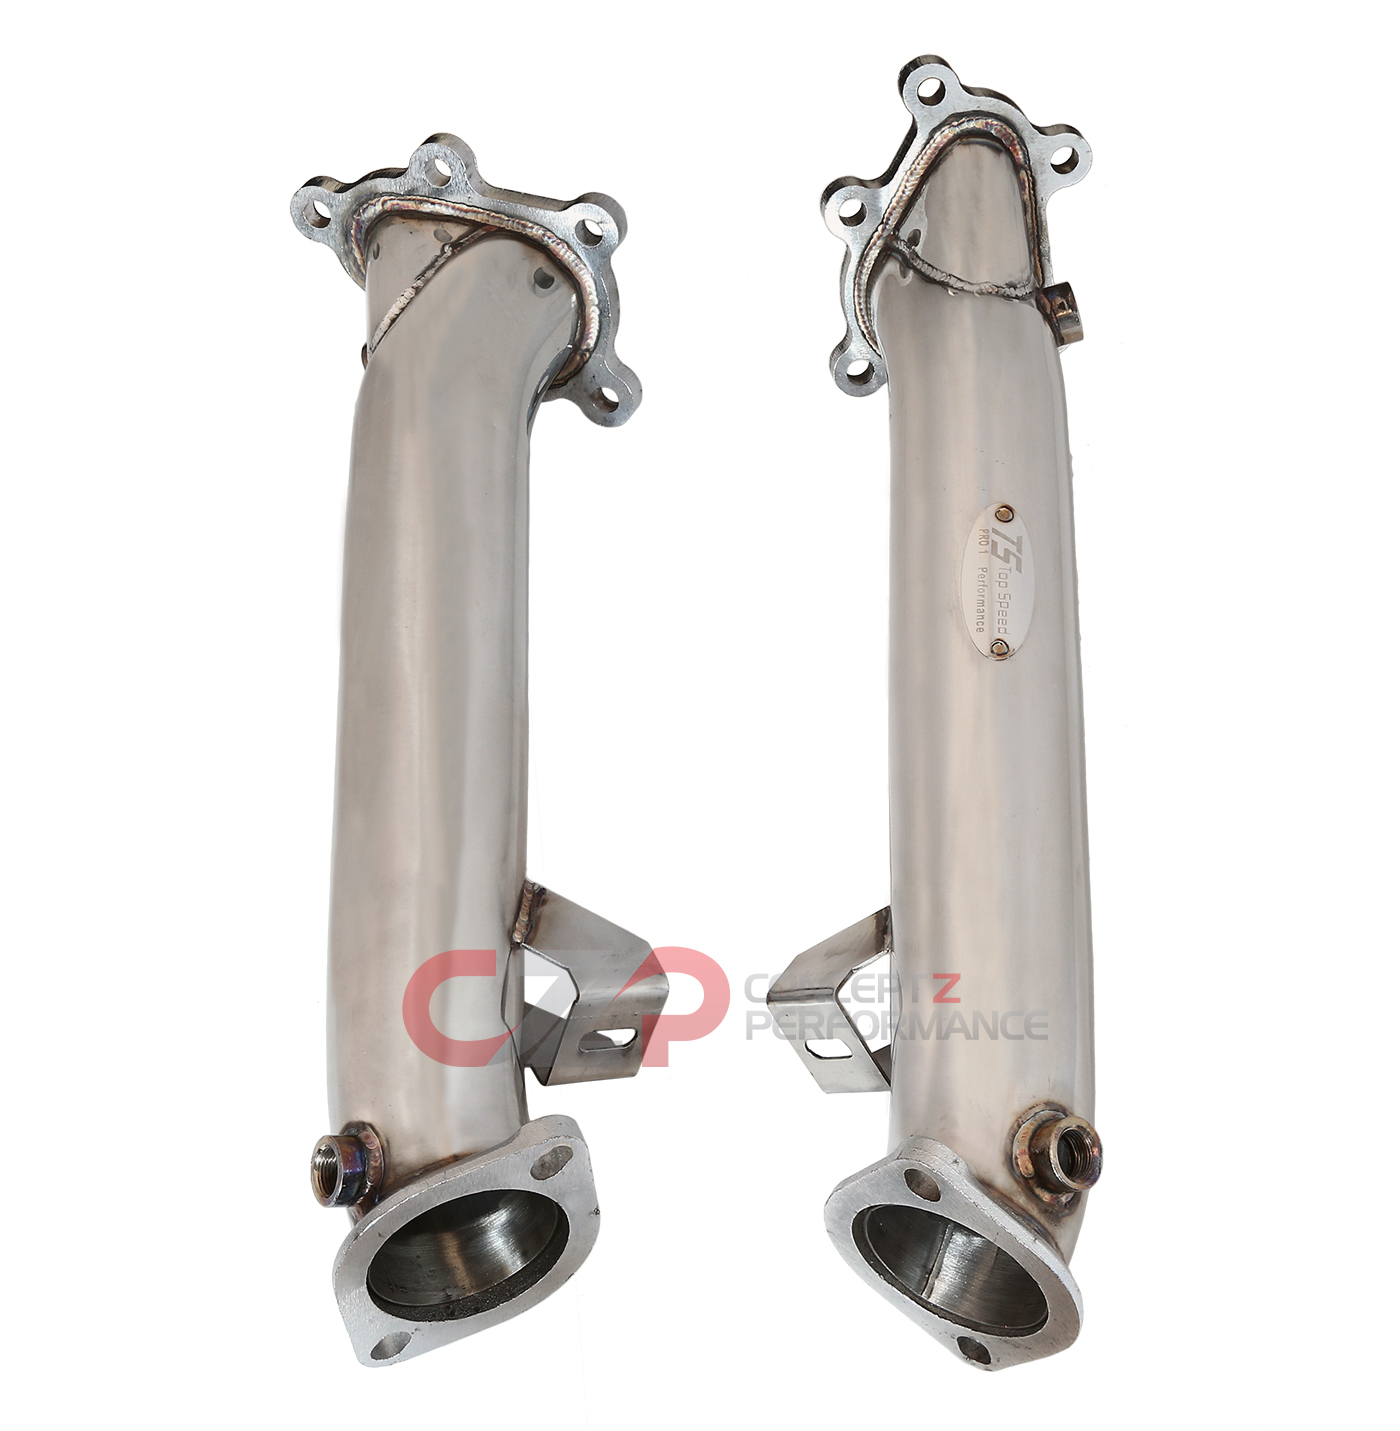 Top Speed Pro-1 Stainless Steel 76mm 3" Turbo Downpipes - Nissan GT-R 09+ R35